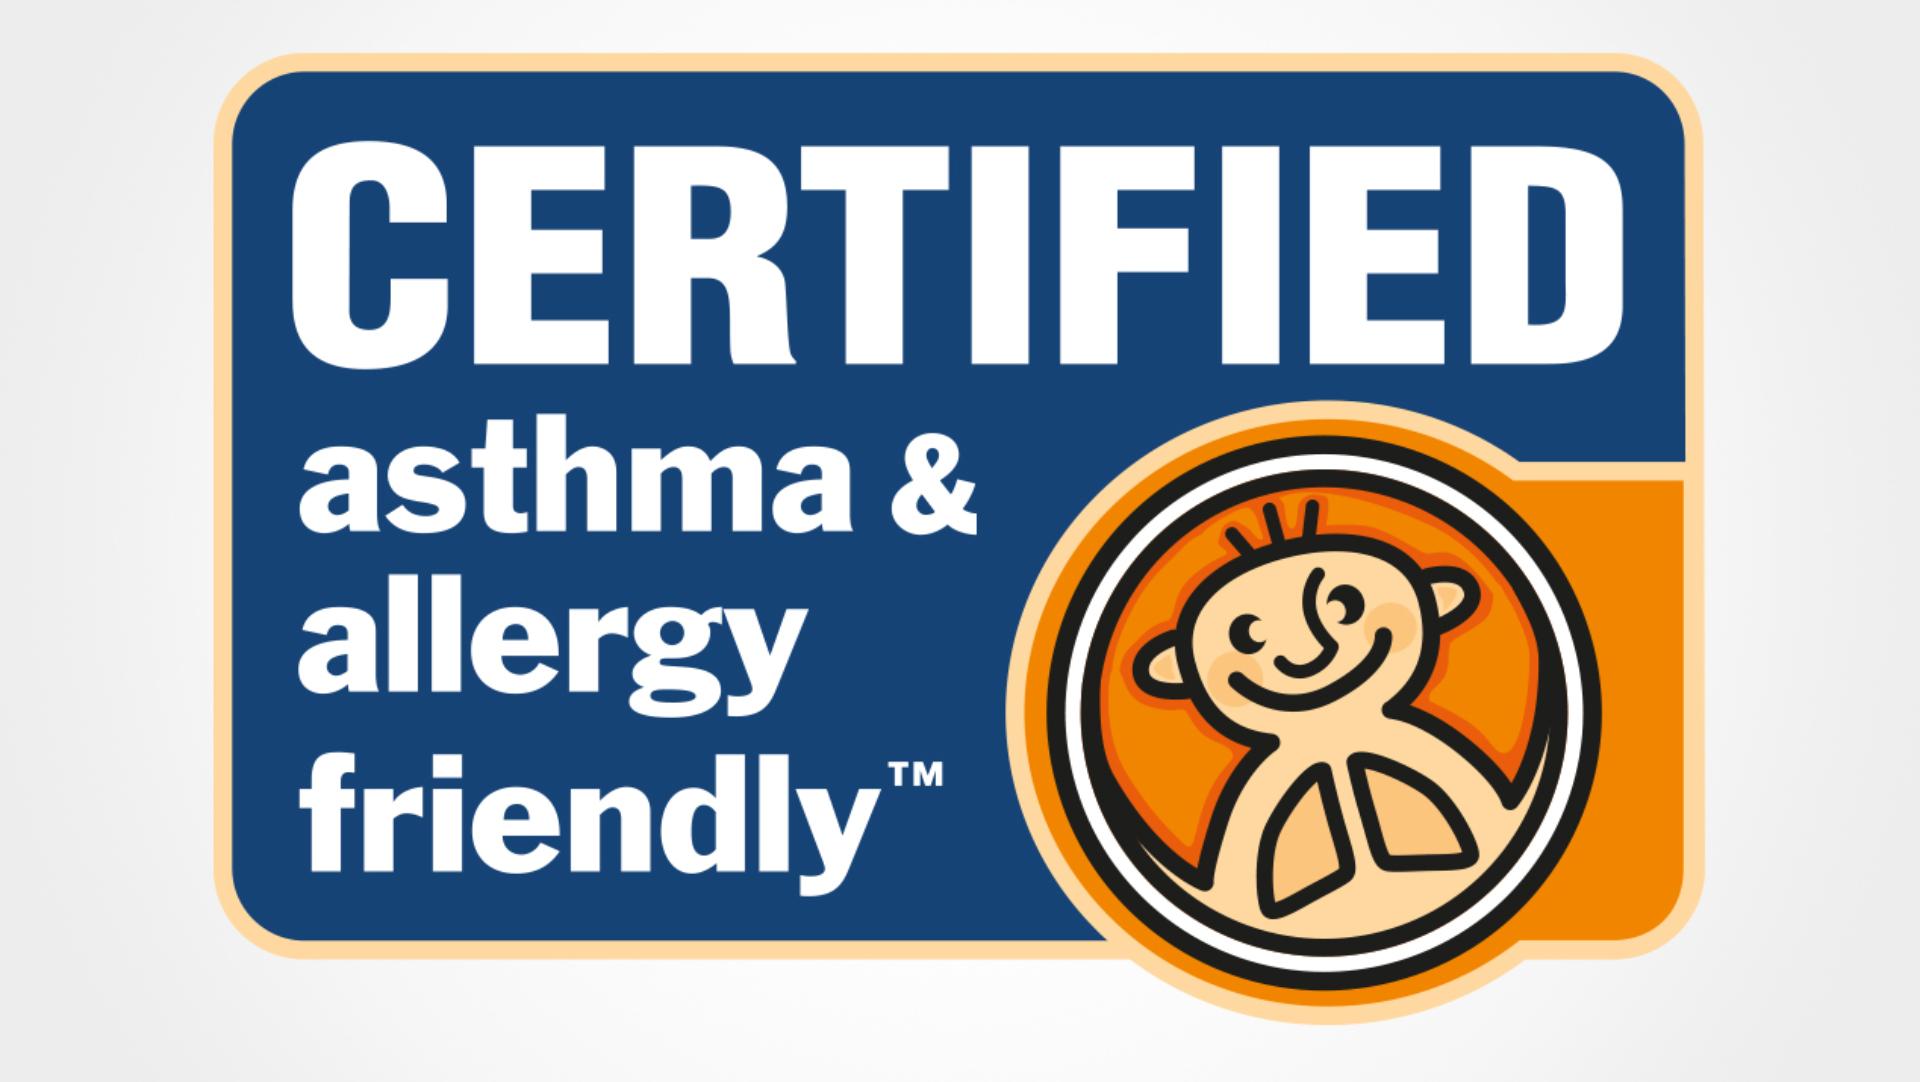 Certified asthma and allergy friendly™ logo